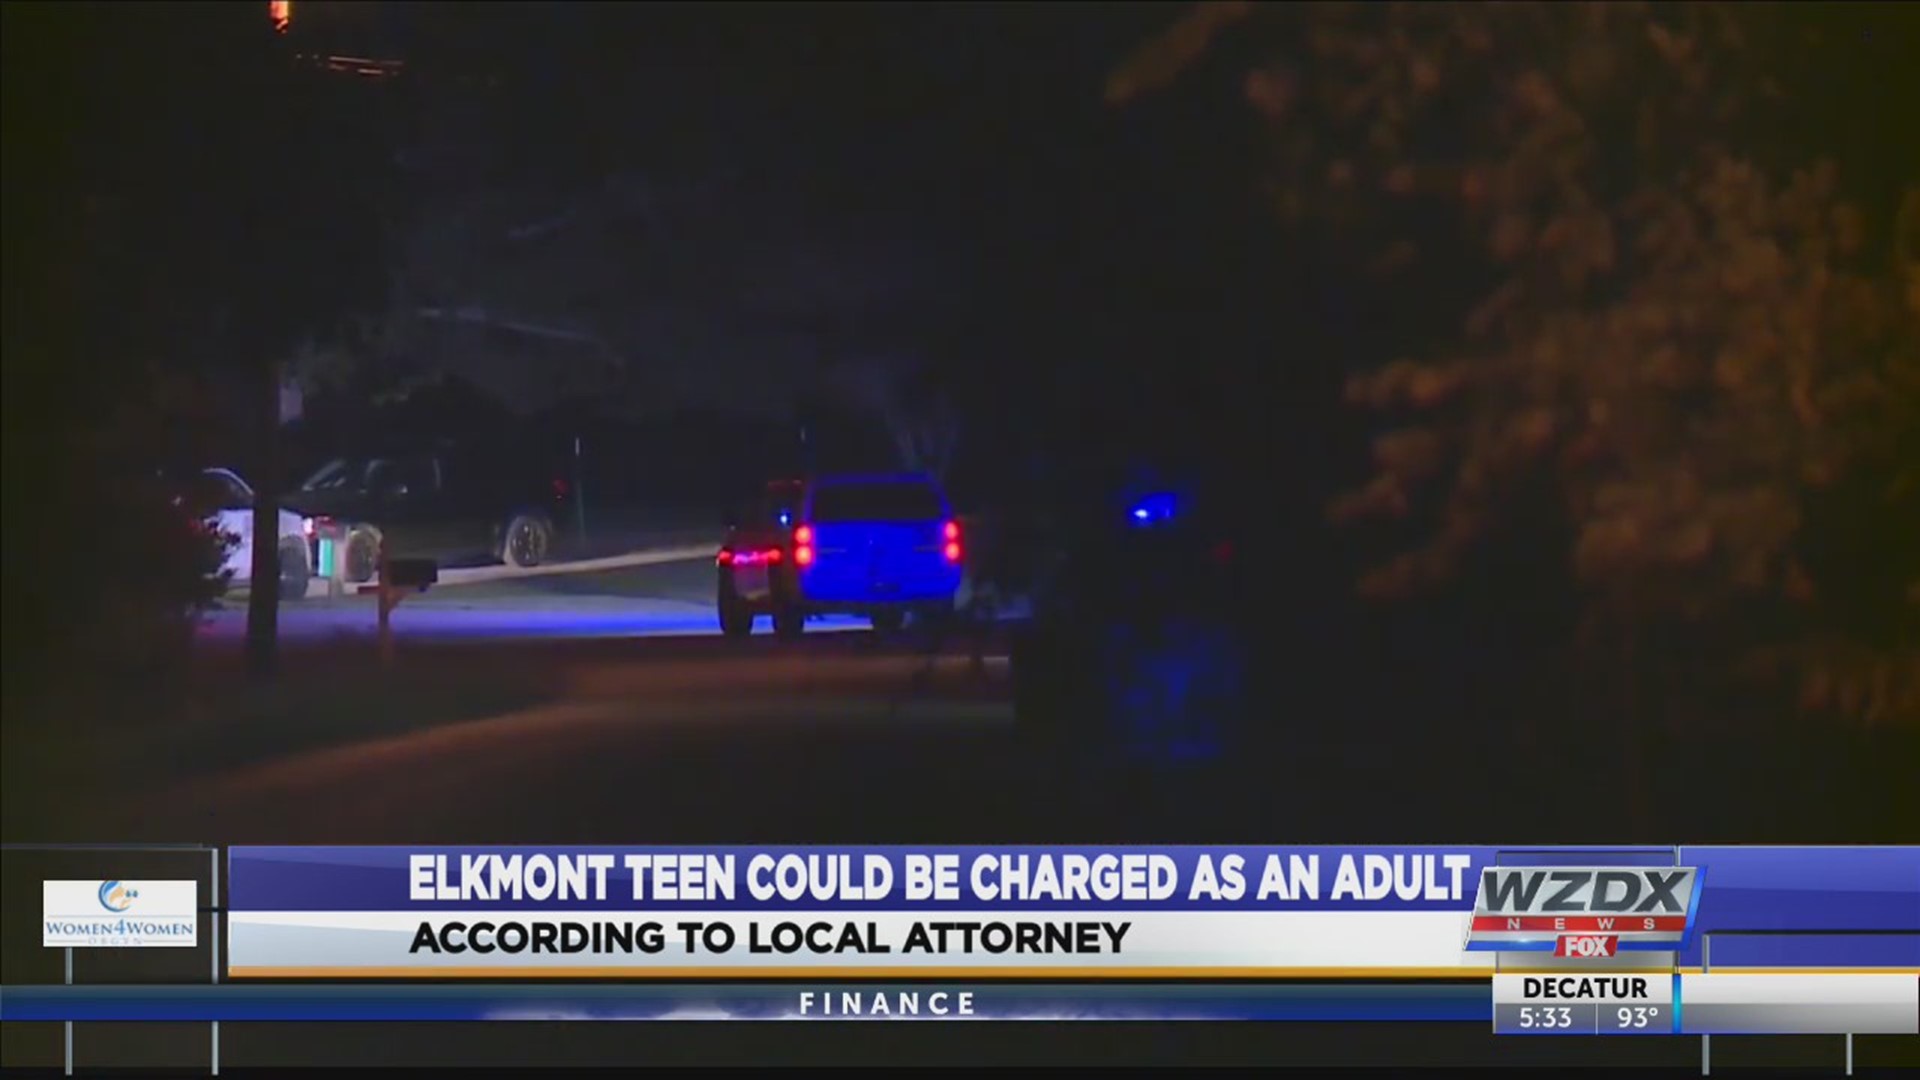 The 14-year-old Elkmont teen who confessed to killing his family could be charged as an adult.